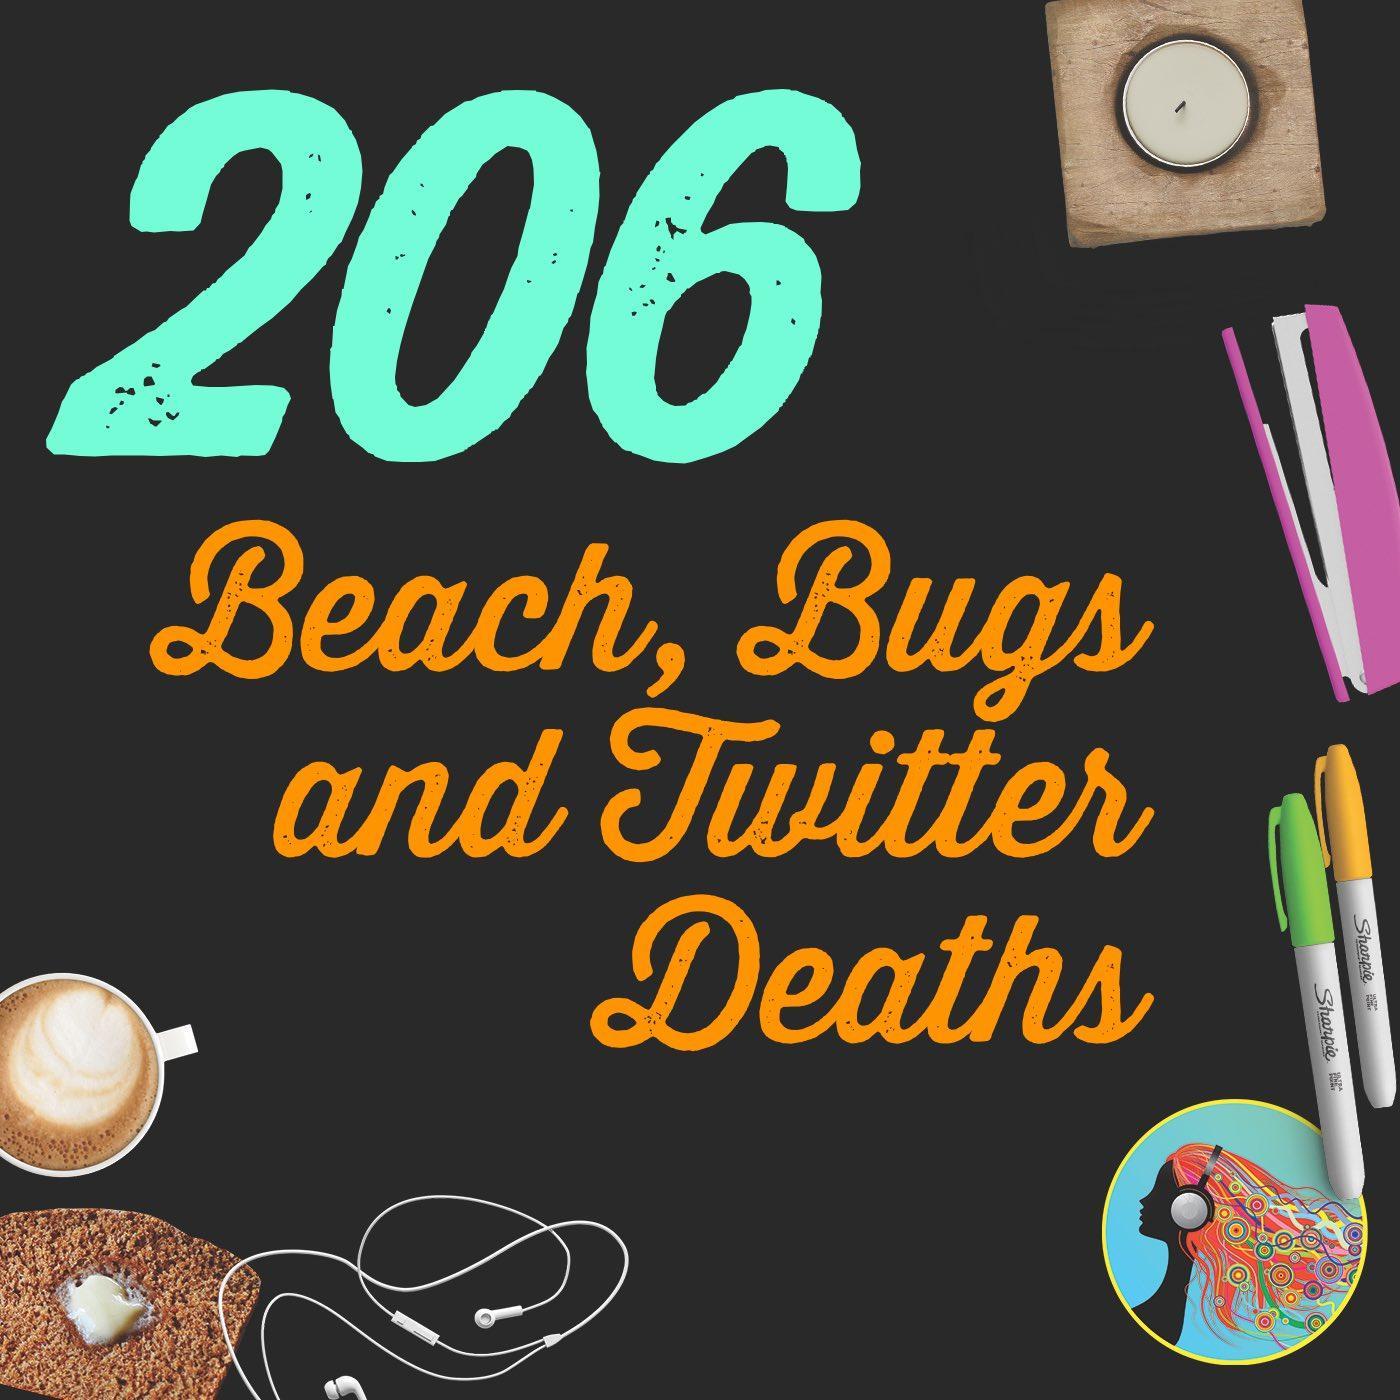 206 Beach Bugs and Twitter Deaths